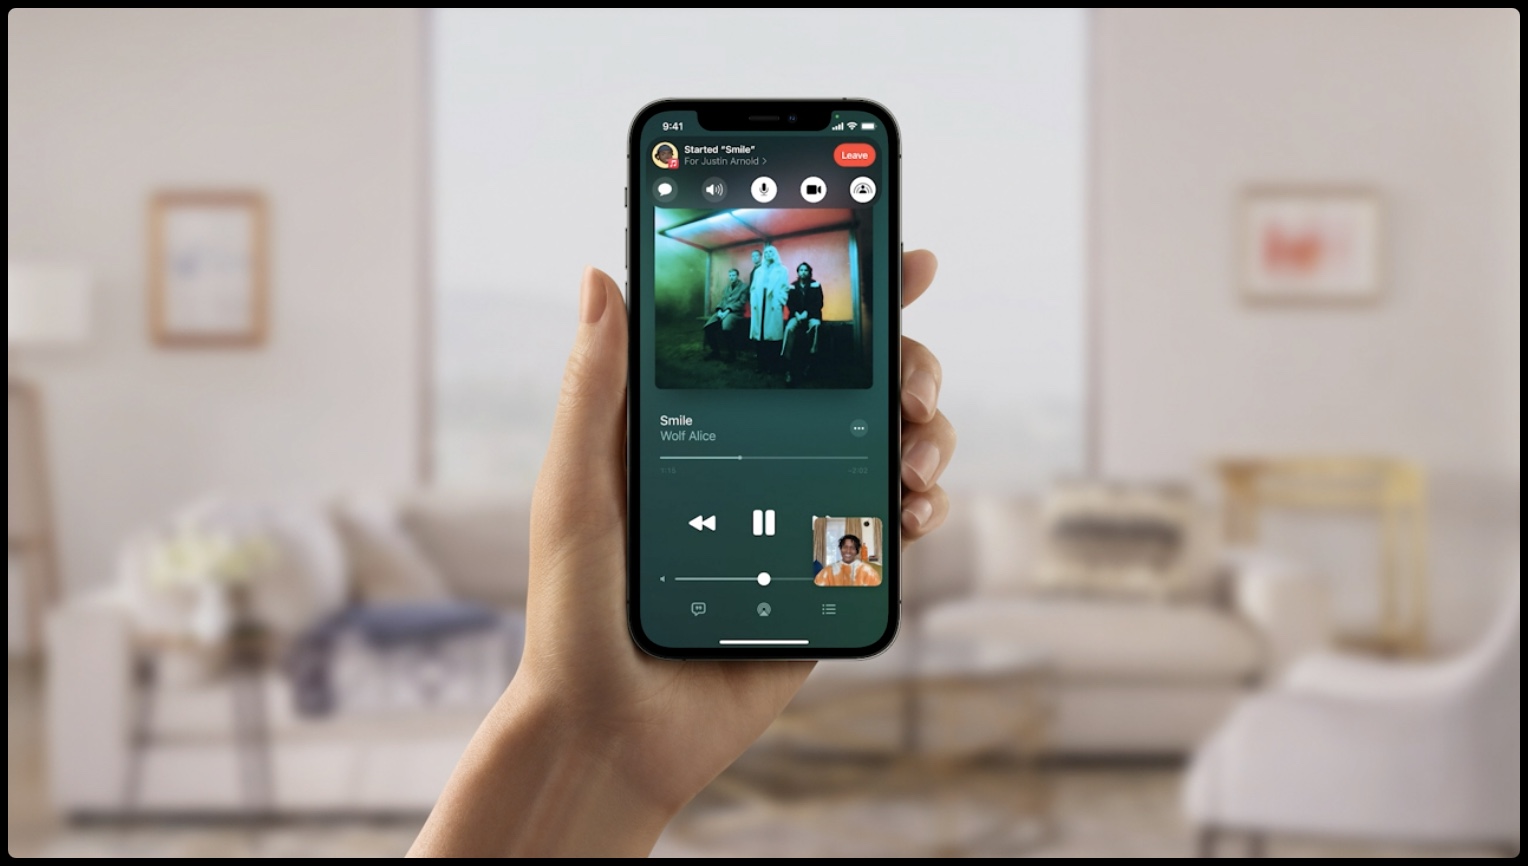 Apple's marketing image for SharePlay on iPhone showing shared media playing during FaceTime video call